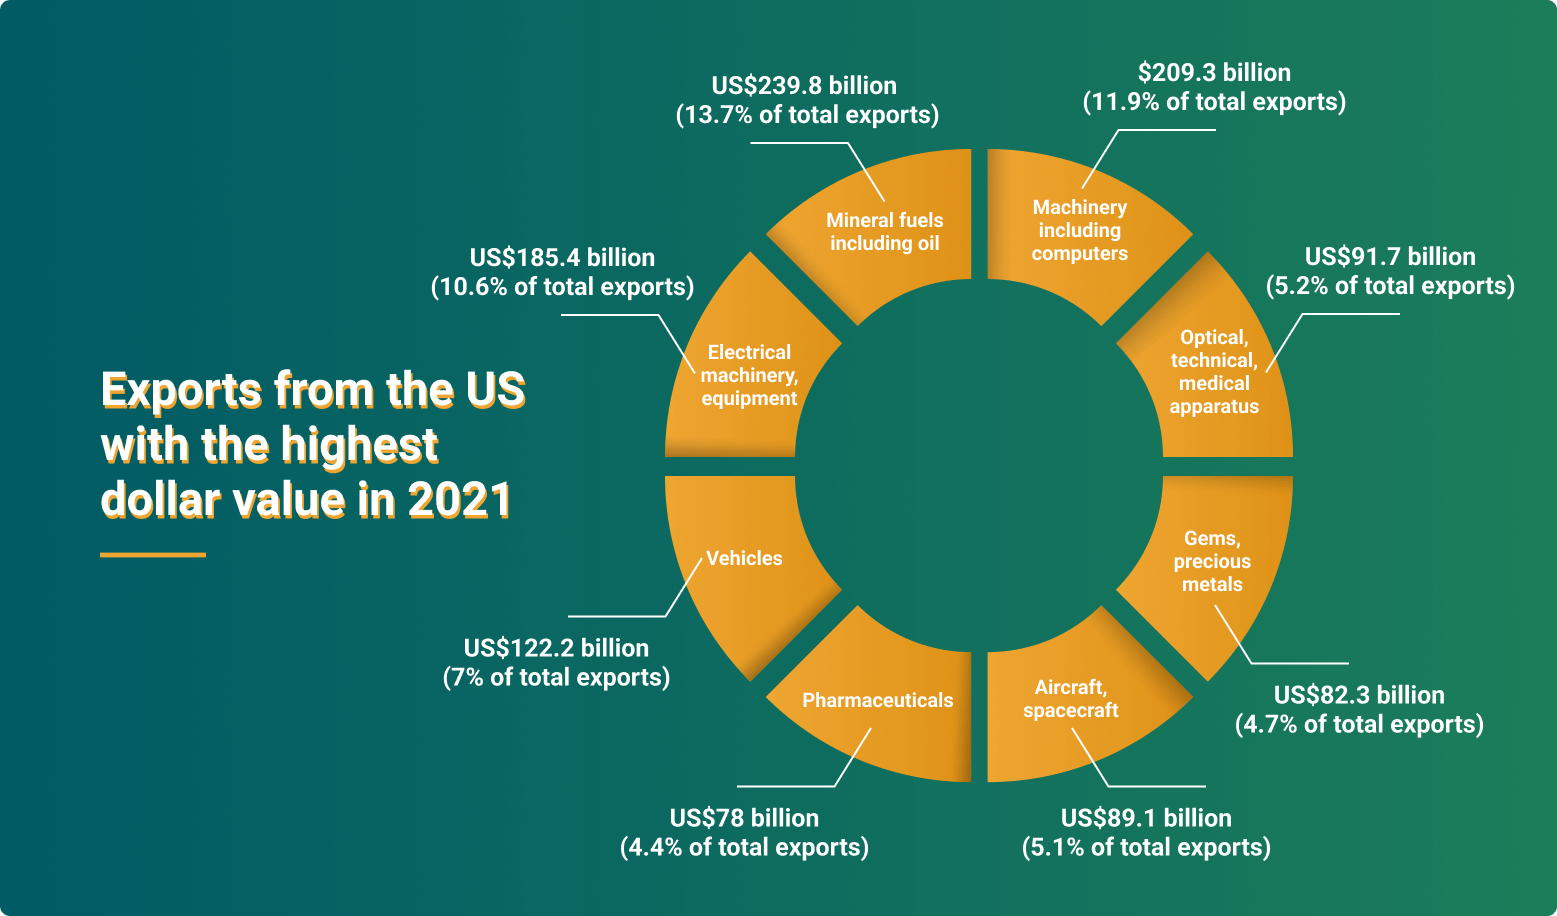 Top exports in US 2020